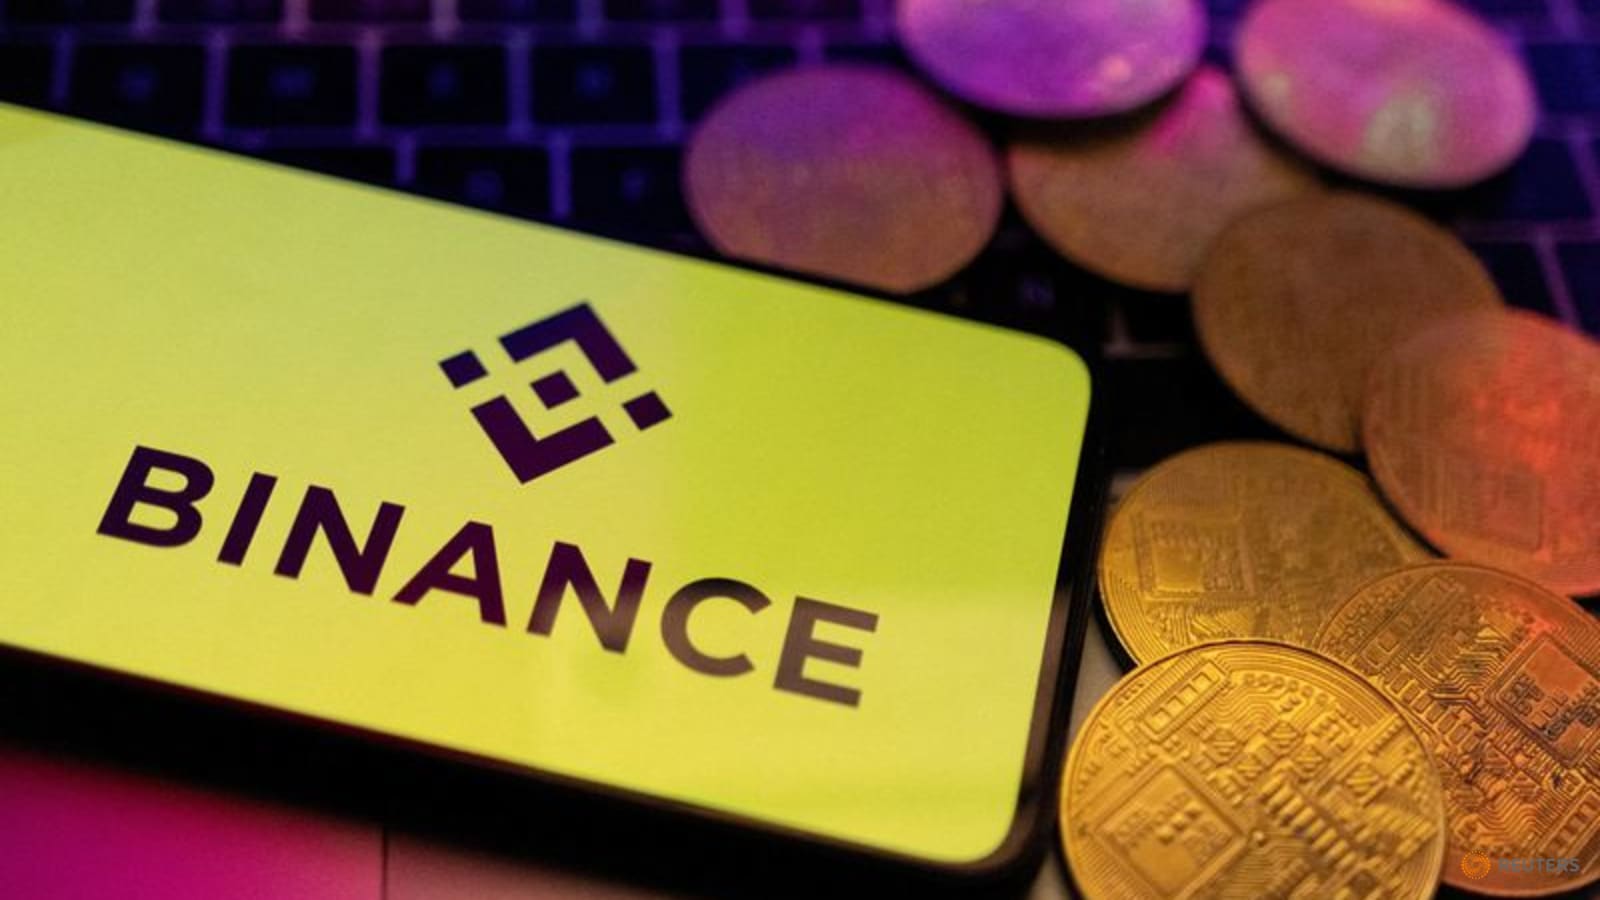 Detained Binance executive in court on Nigerian tax, money laundry charges